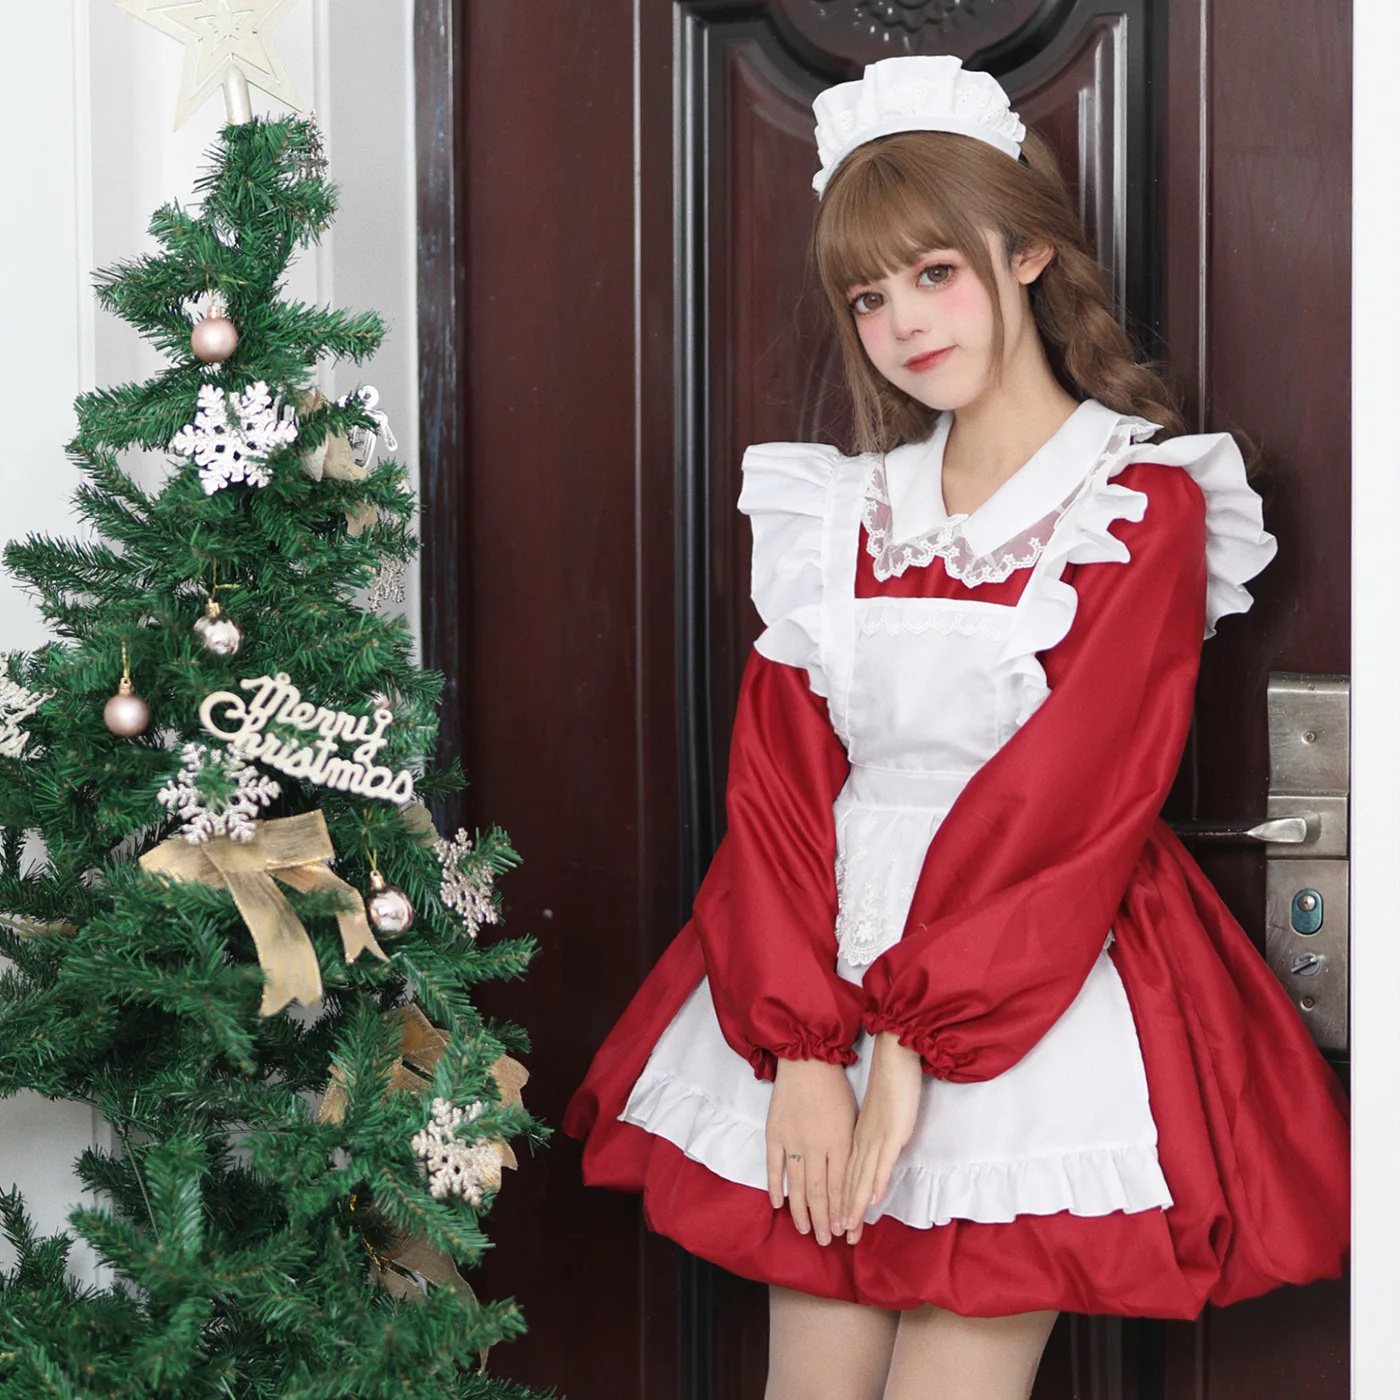 

Christmas Halloween Adult Multiple Colors Maid Uniform Cute Woman Princess Lolita Dress Cosplay Costume Show Party Outfit